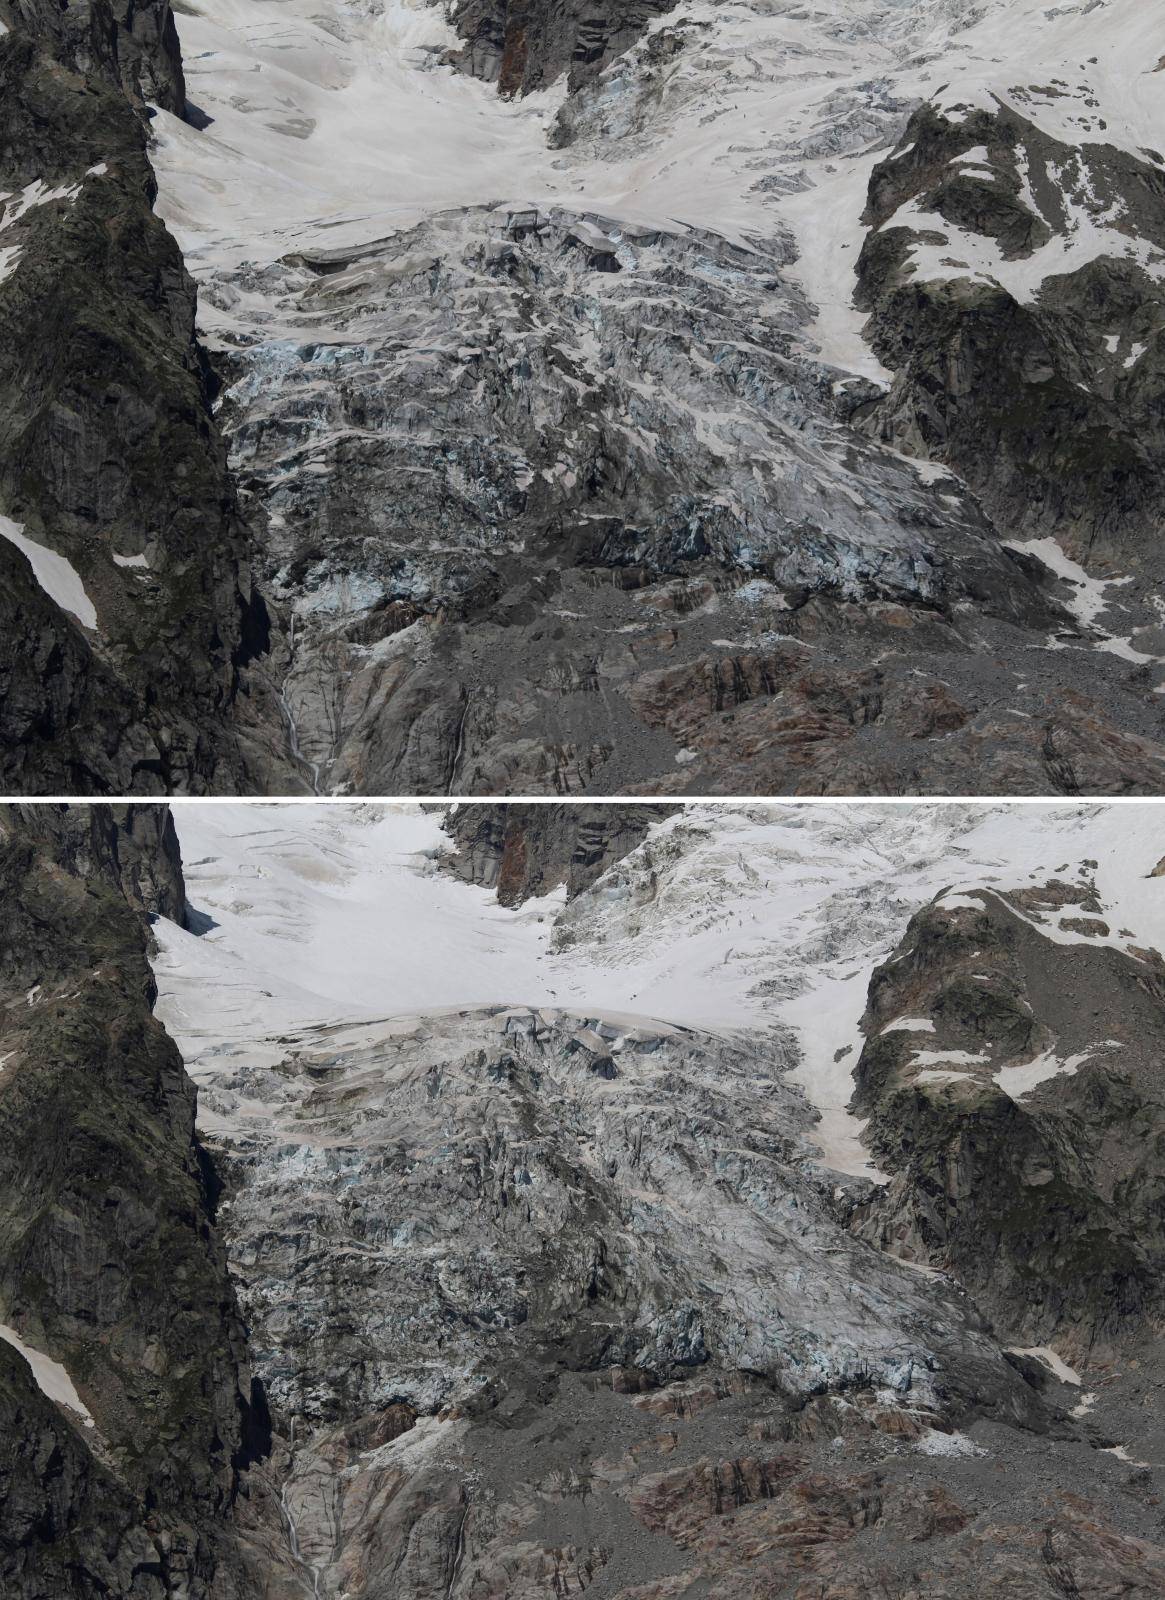 A combo shows a segment of the Planpincieux glacier on the Italian side of the Mont Blanc, in Aosta